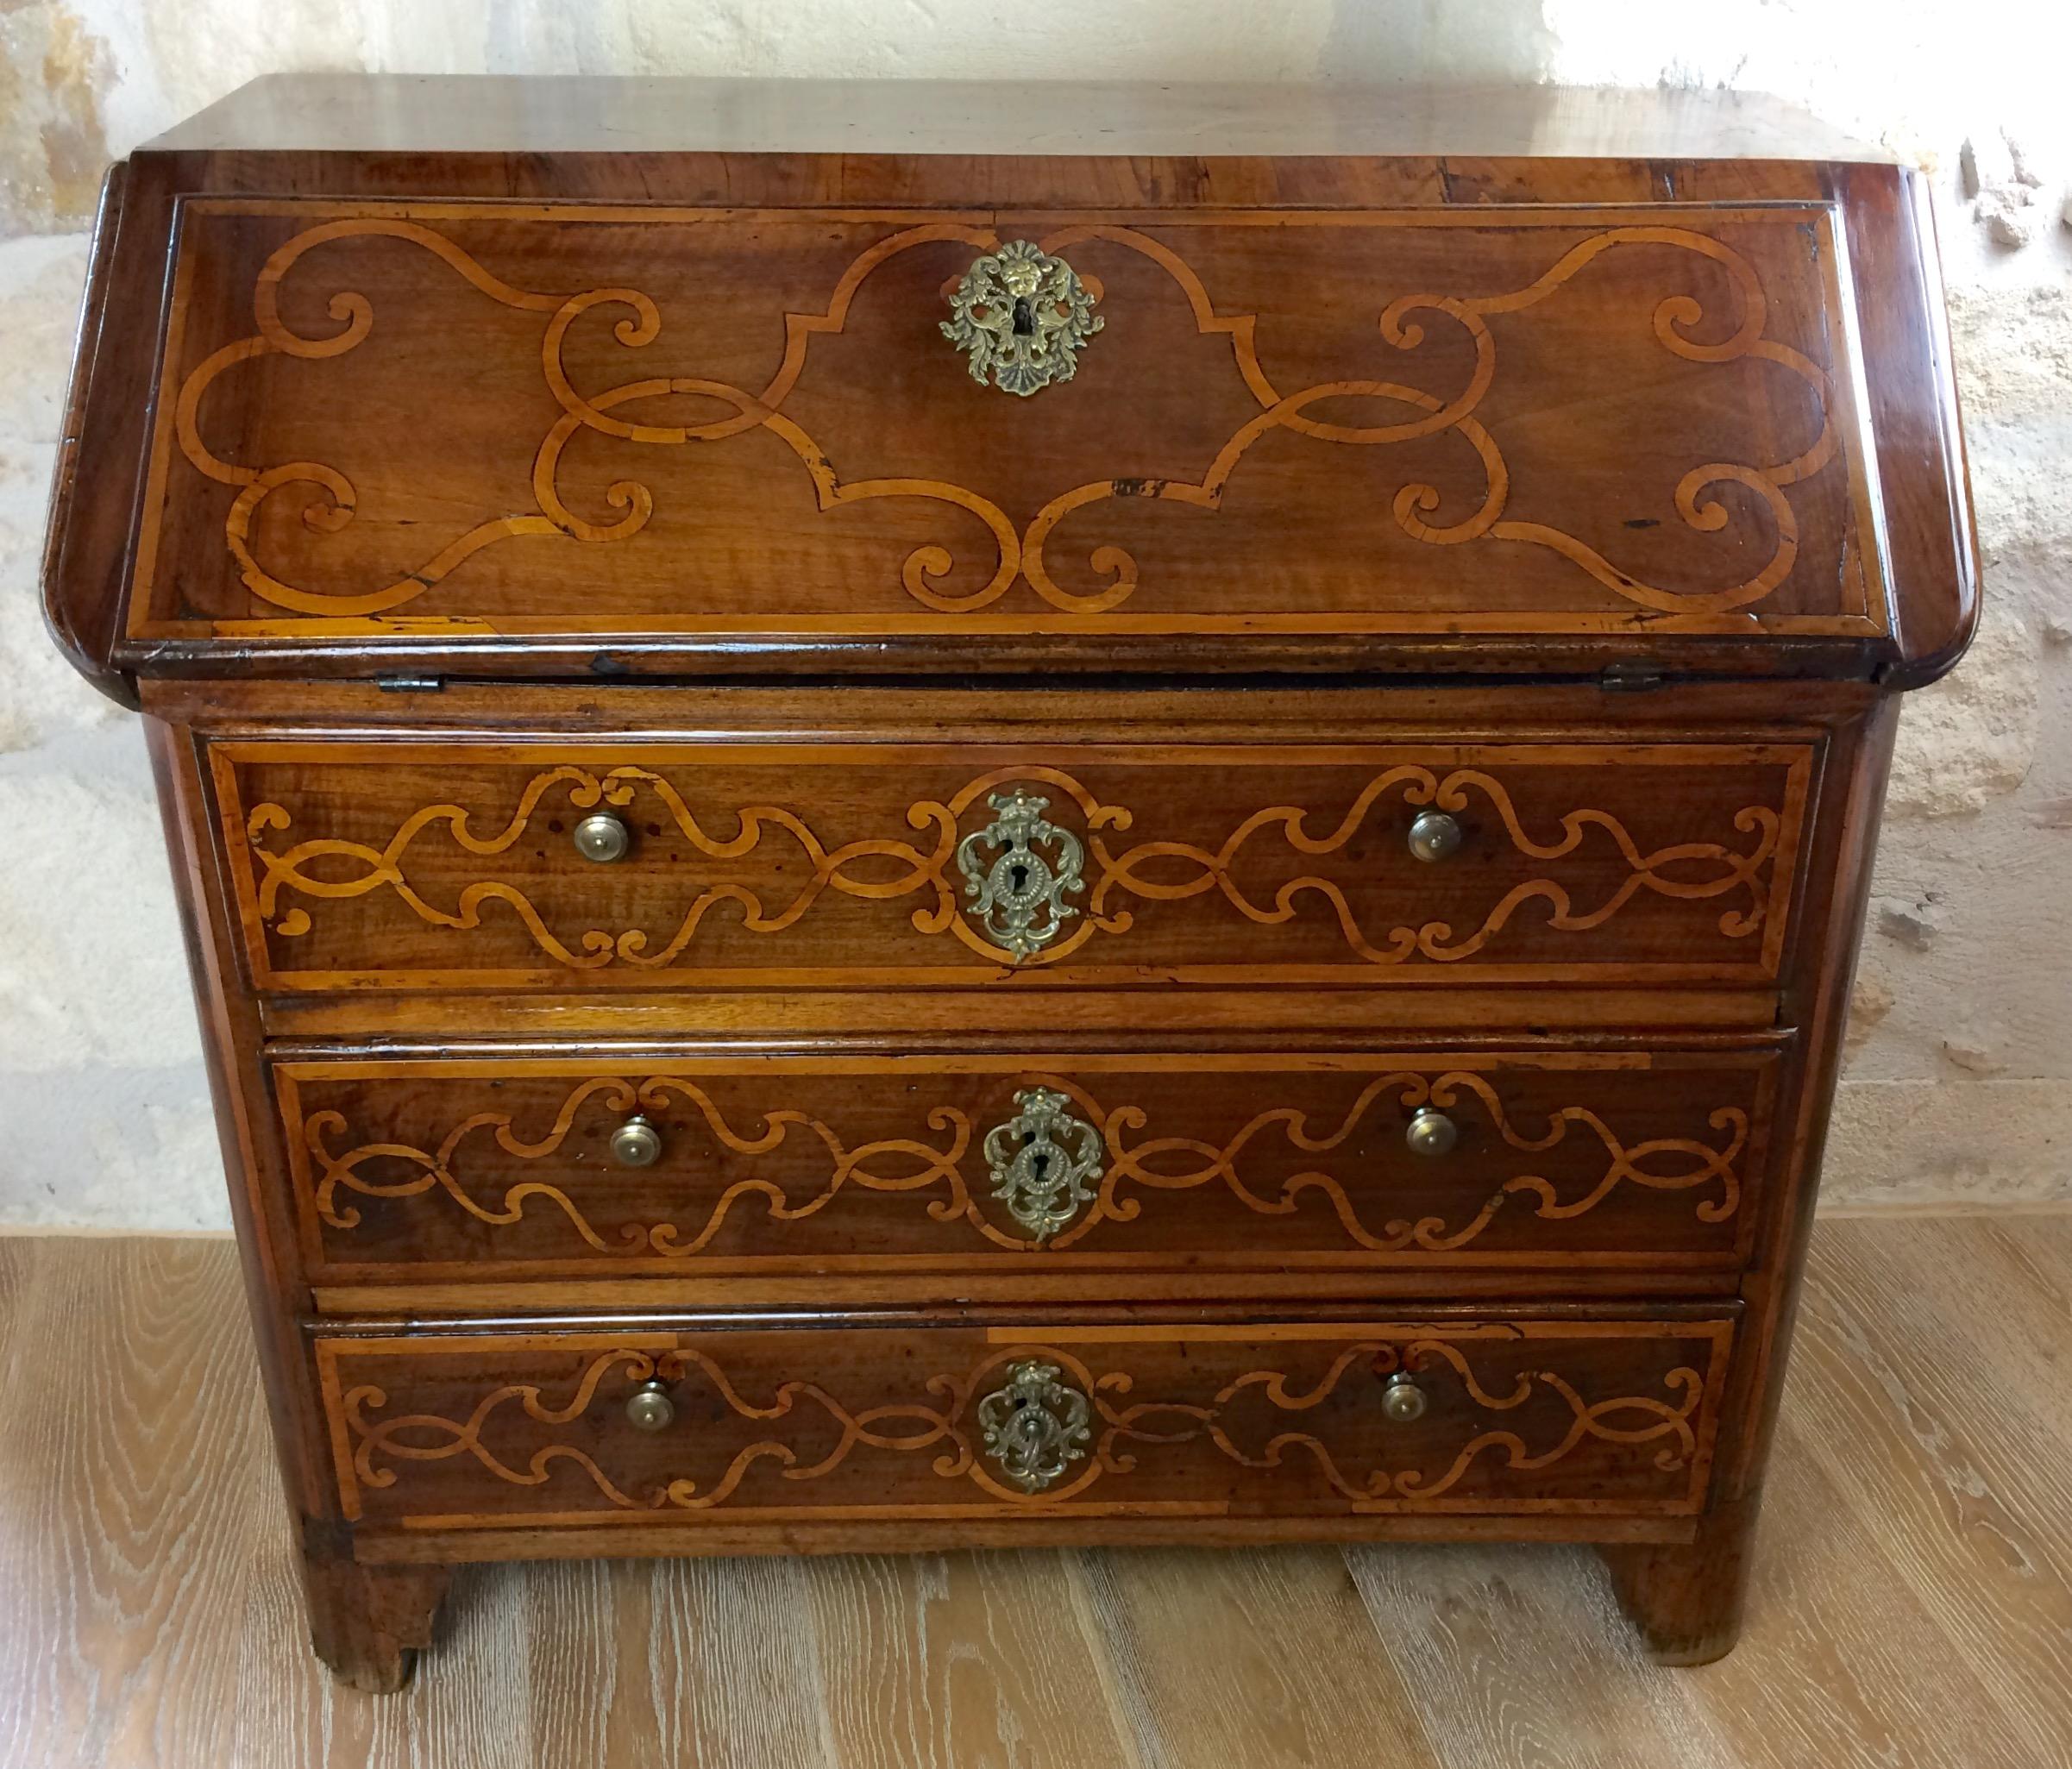 Traditional 18th Century Italian desk commode from the Piemonte region made from solid walnut. 

A fine Italian walnut and inlaid bureau with drop leaf dating back to 18th century, waving front, three deep and large drawers; a fall-front opening to